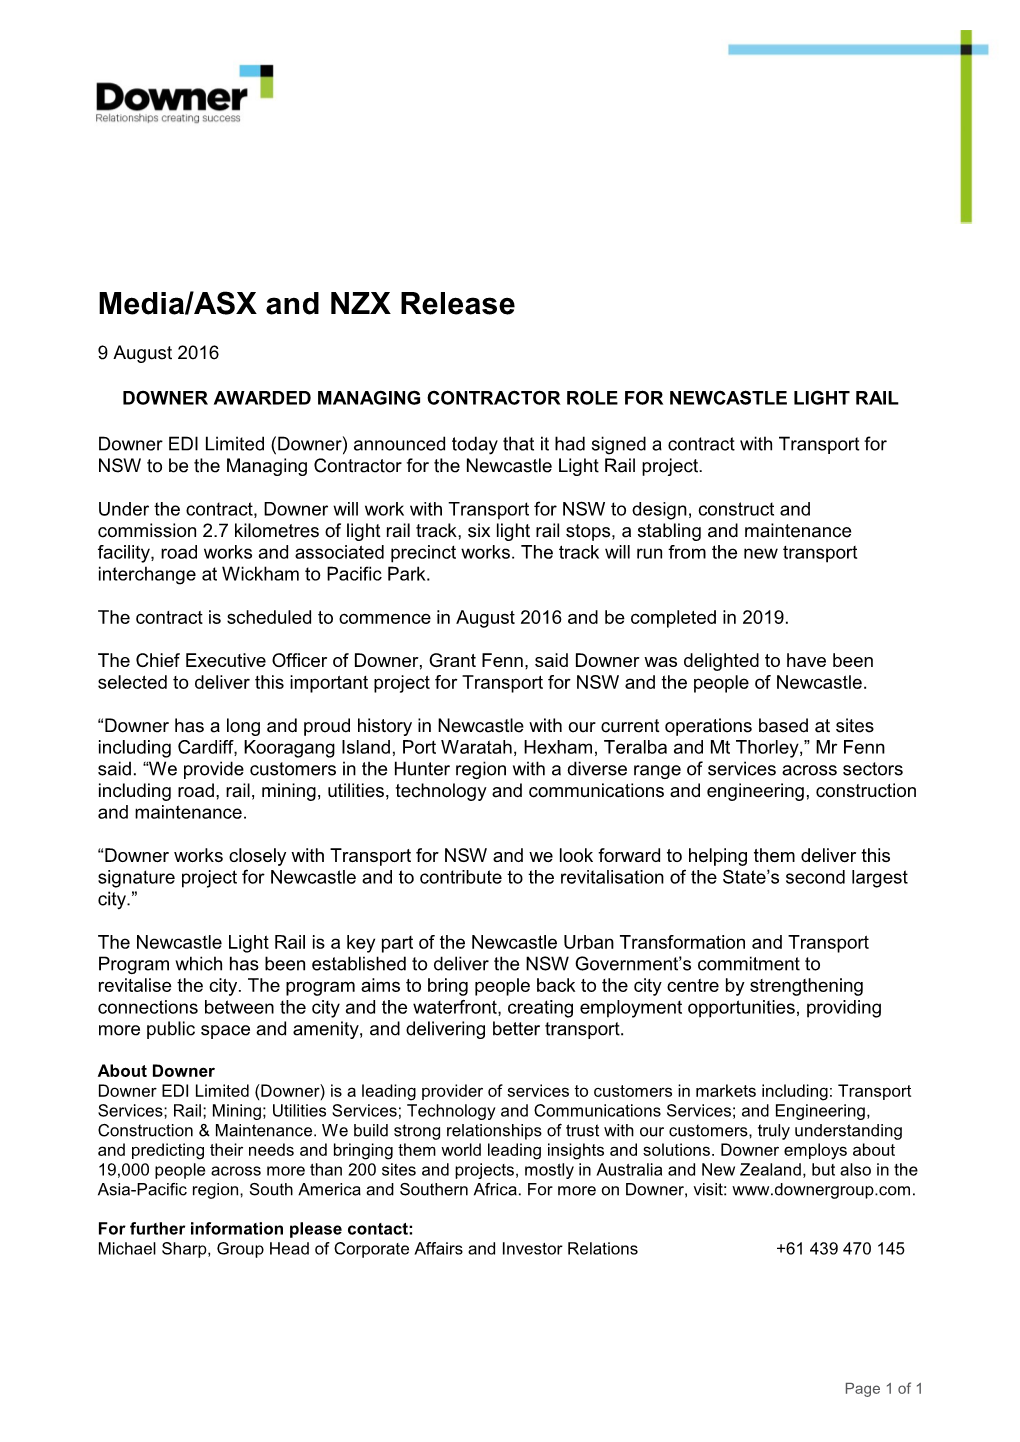 Downer Awarded As Managing Contractor for Newcastle Light Rail